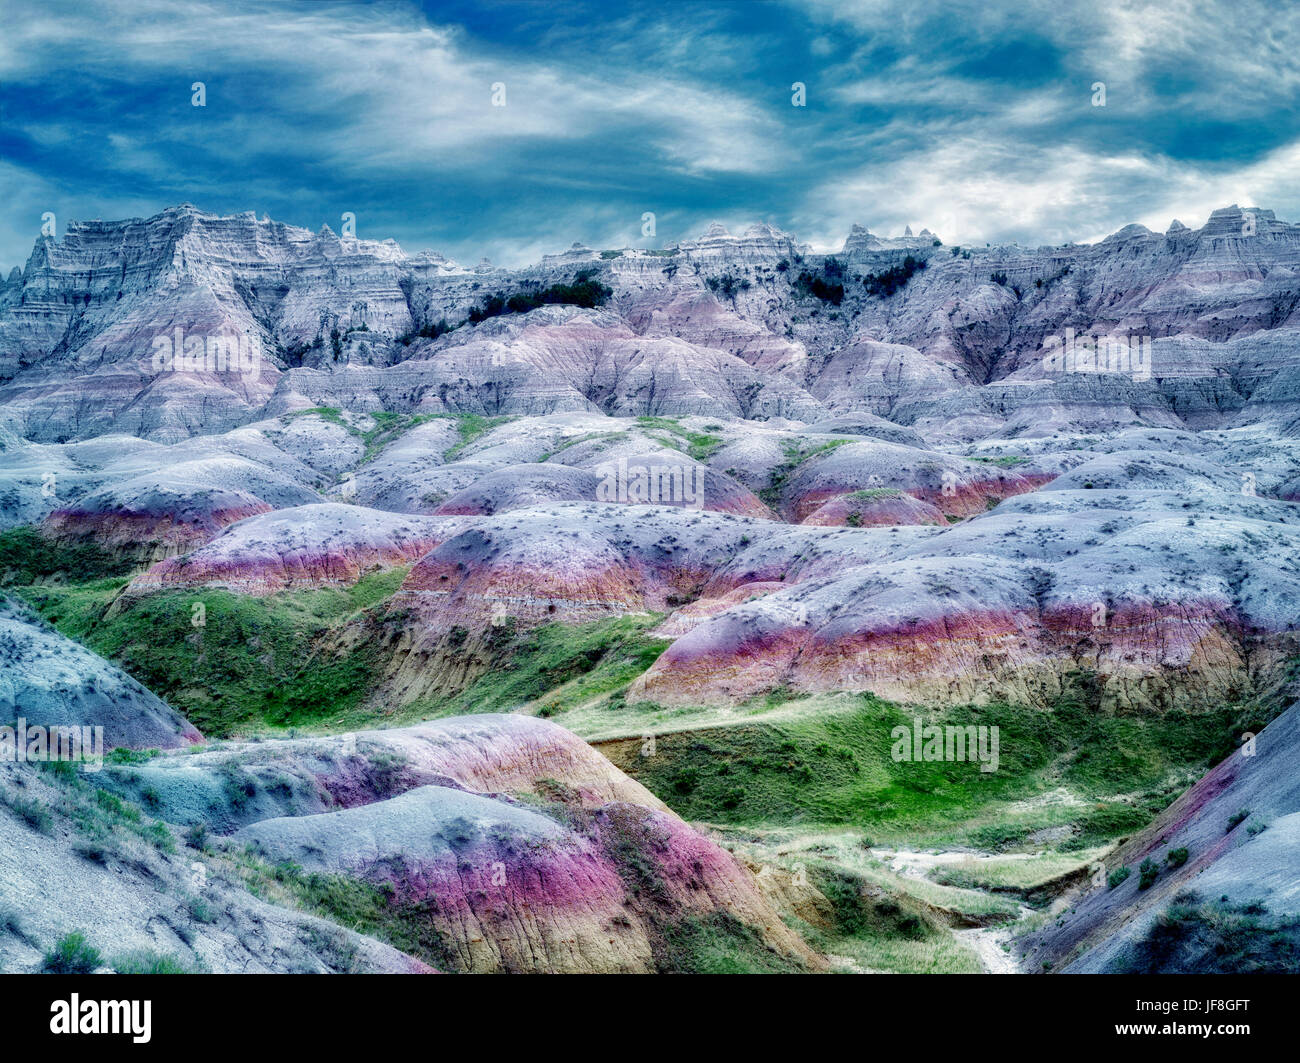 Colorful formations in Badlands National Park, South Dakota Stock Photo